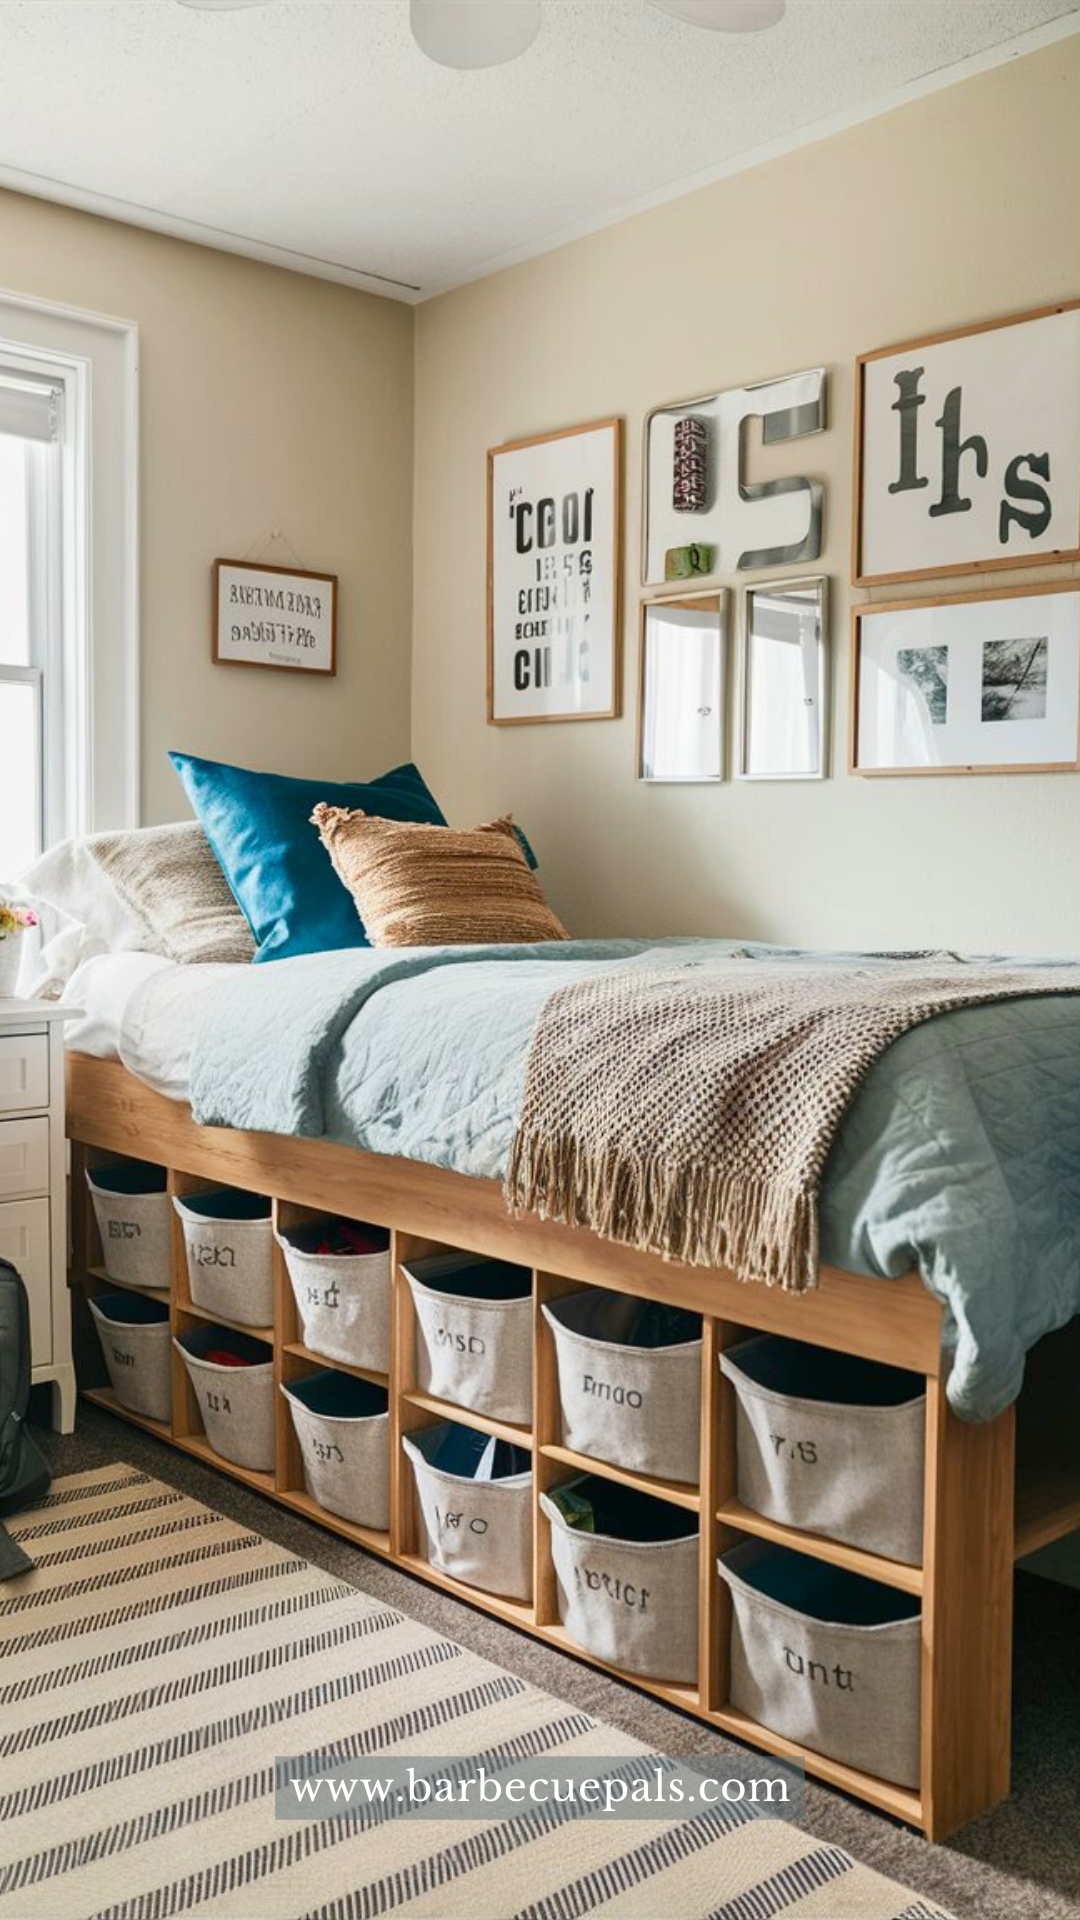 A cozy dorm room with under bed storage bins featuring labeled drawers and stylish space saving design. Include 40 Dorm Storage ideas on the image 1